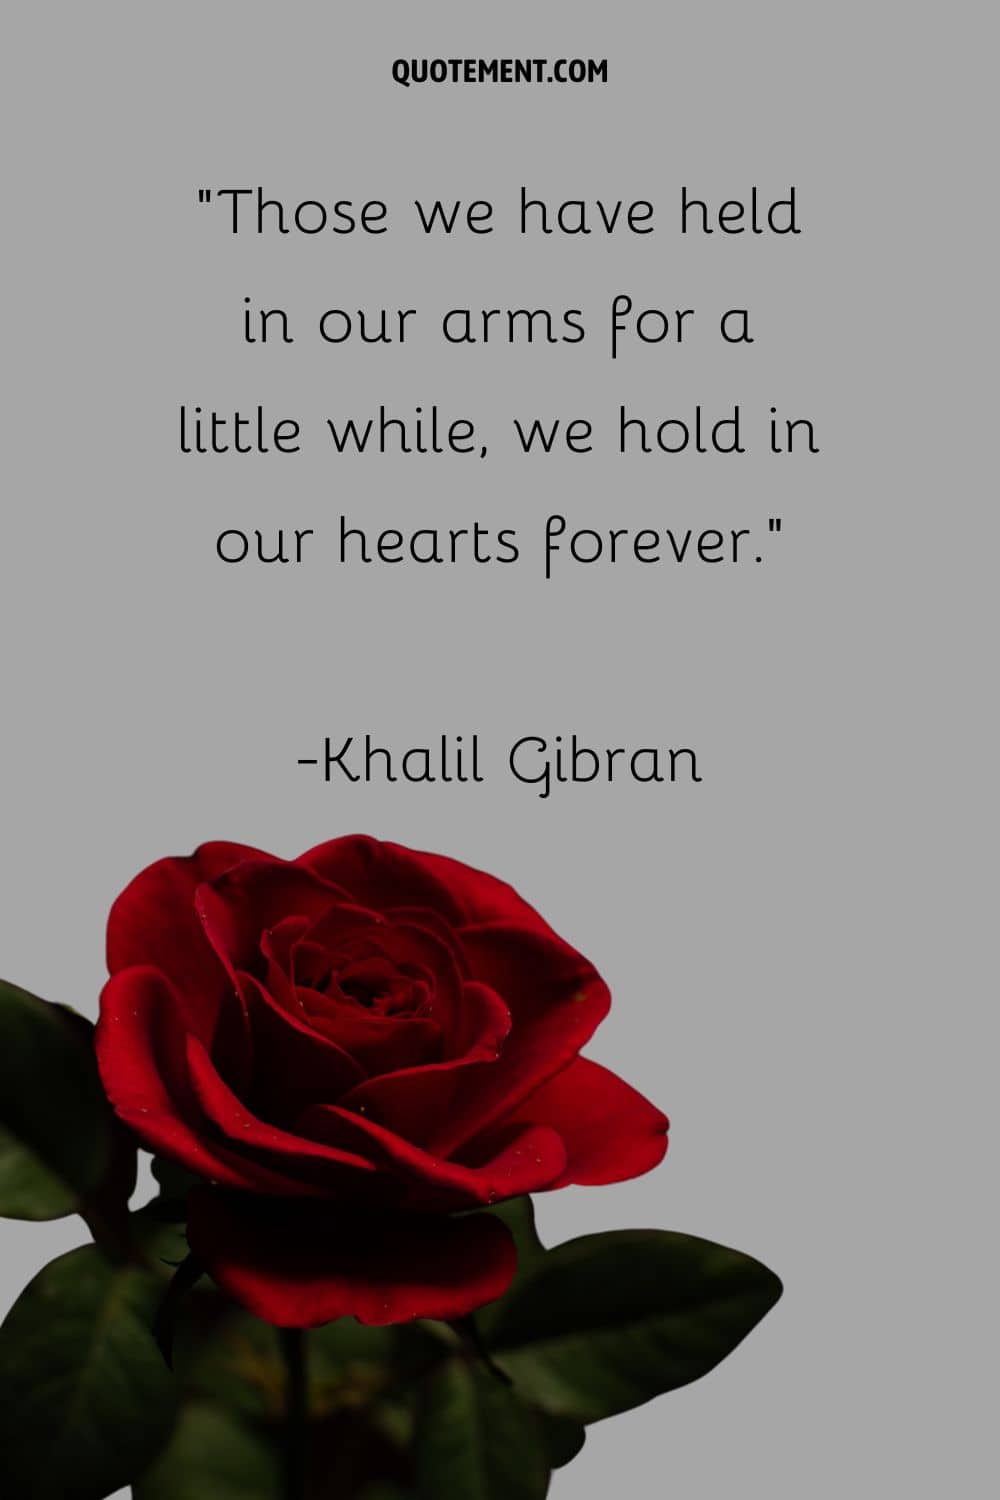 Image of a rose representing a quote about loved ones in heaven.